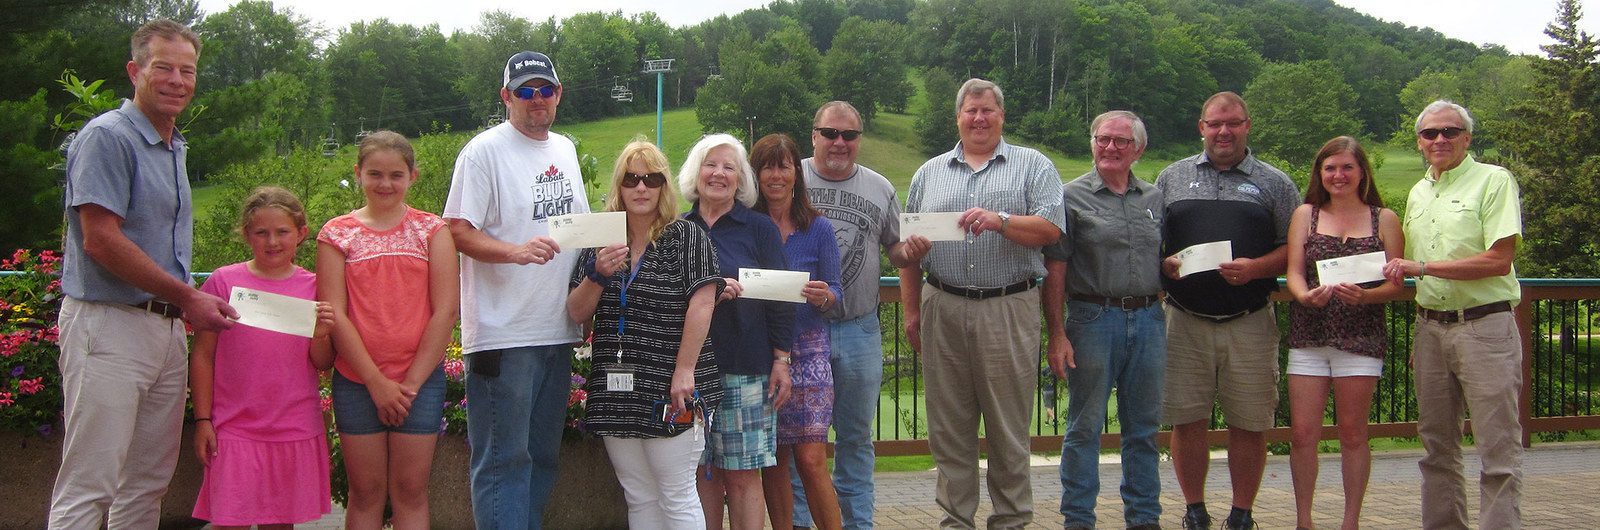 Group photo of people holding checks that will be donated to charity